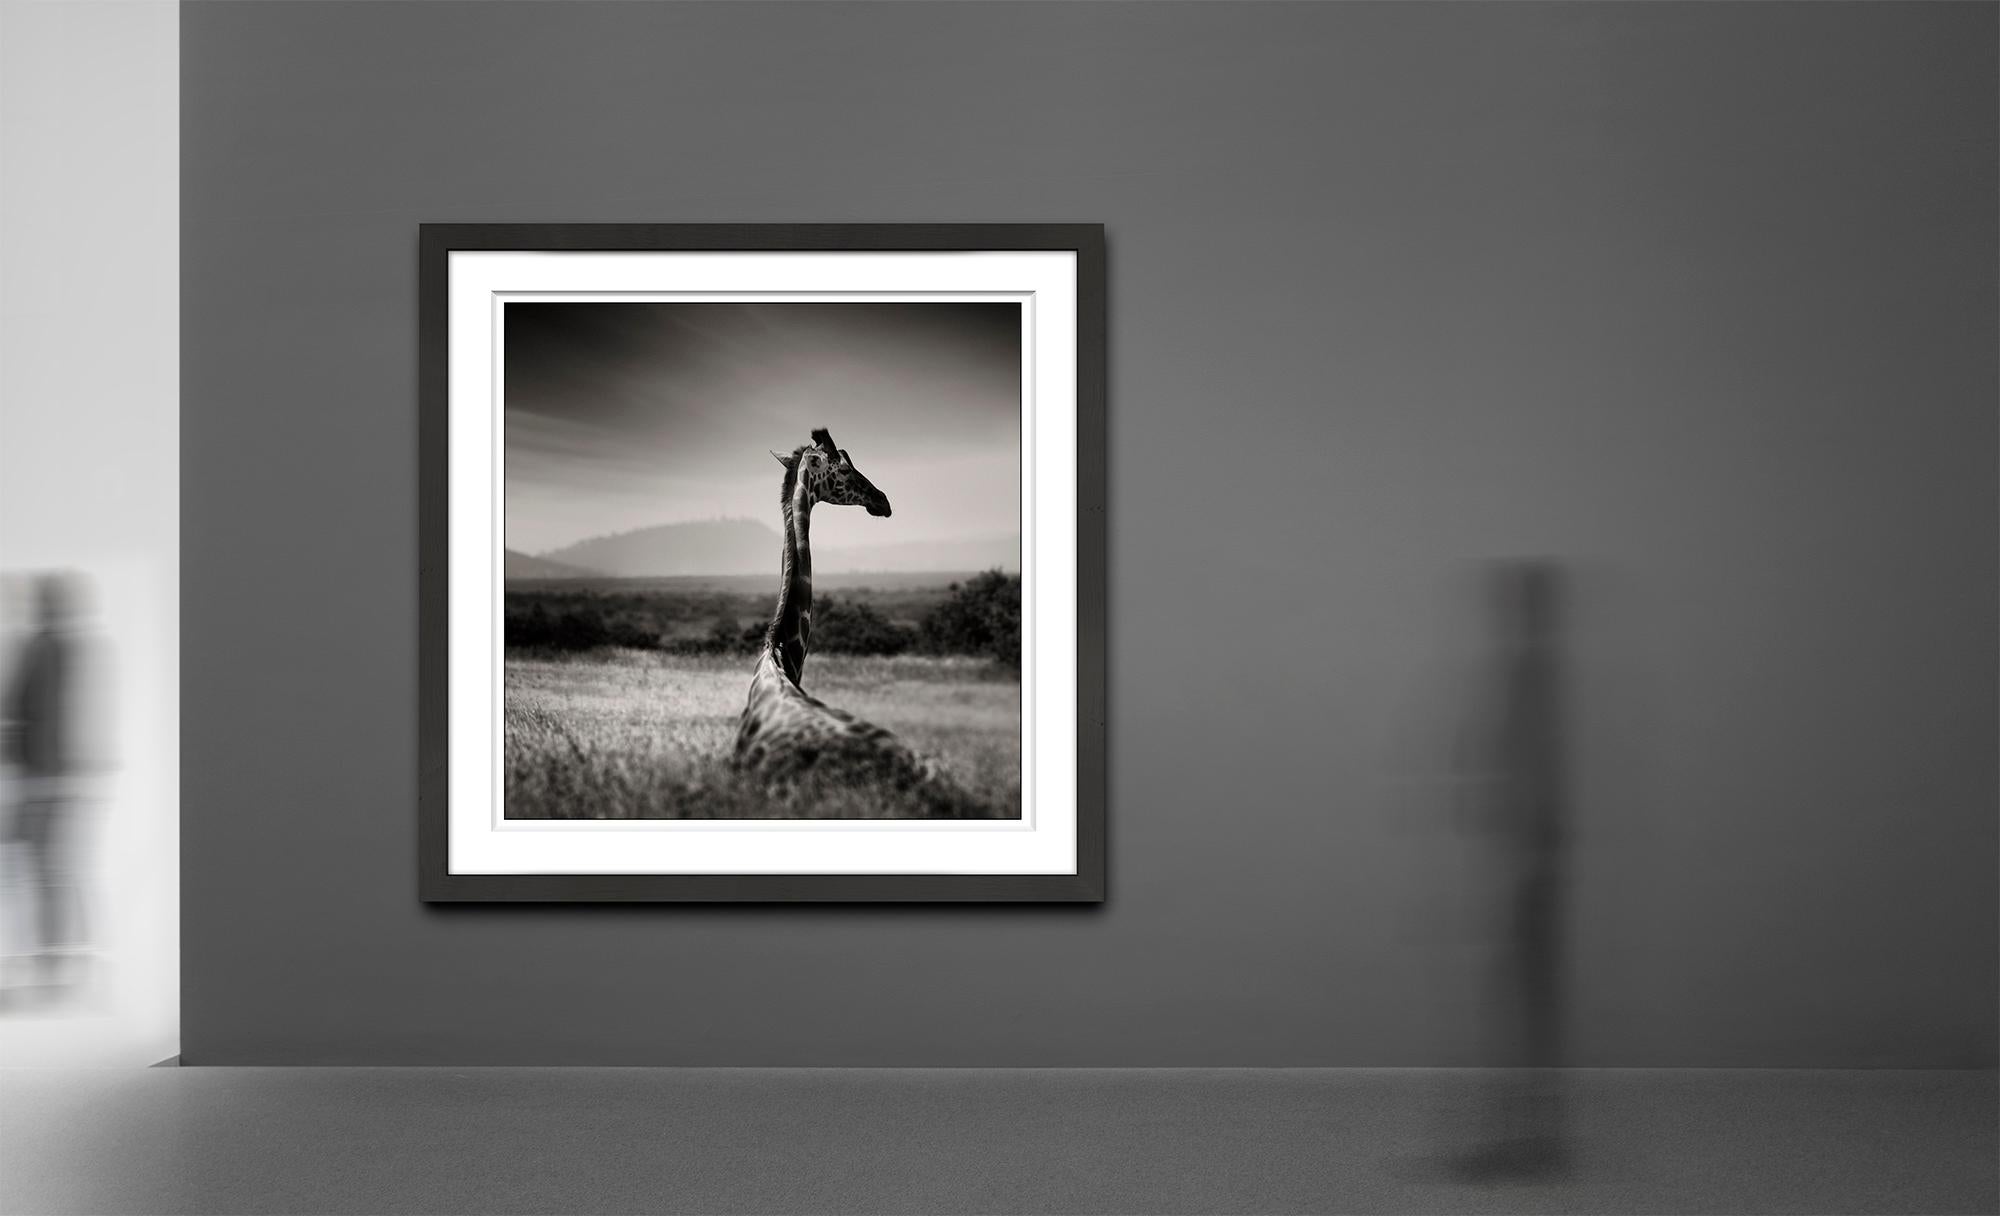 Lying Giraffe, animal, wildlife, black and white photography, africa - Contemporary Photograph by Joachim Schmeisser